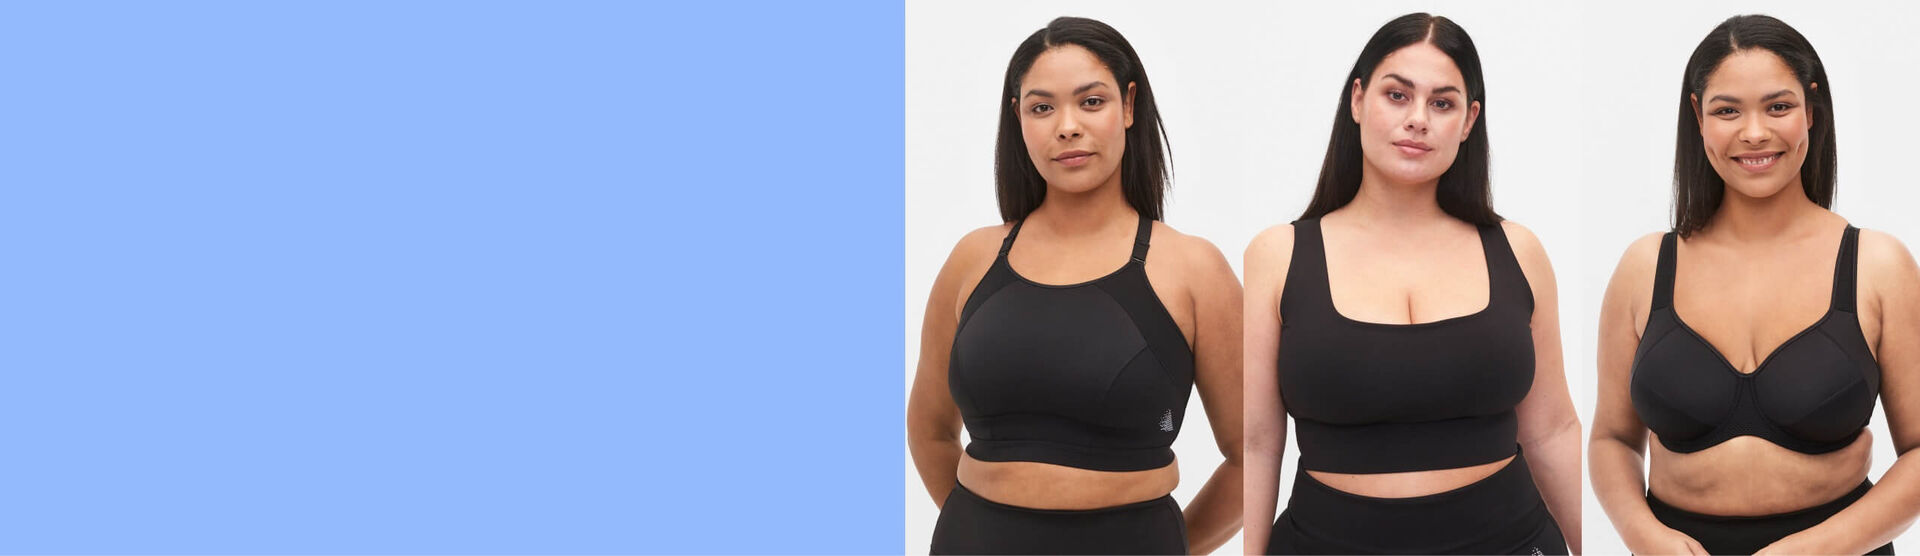 Finding a good sports bra for bigger boobs – here is what you need